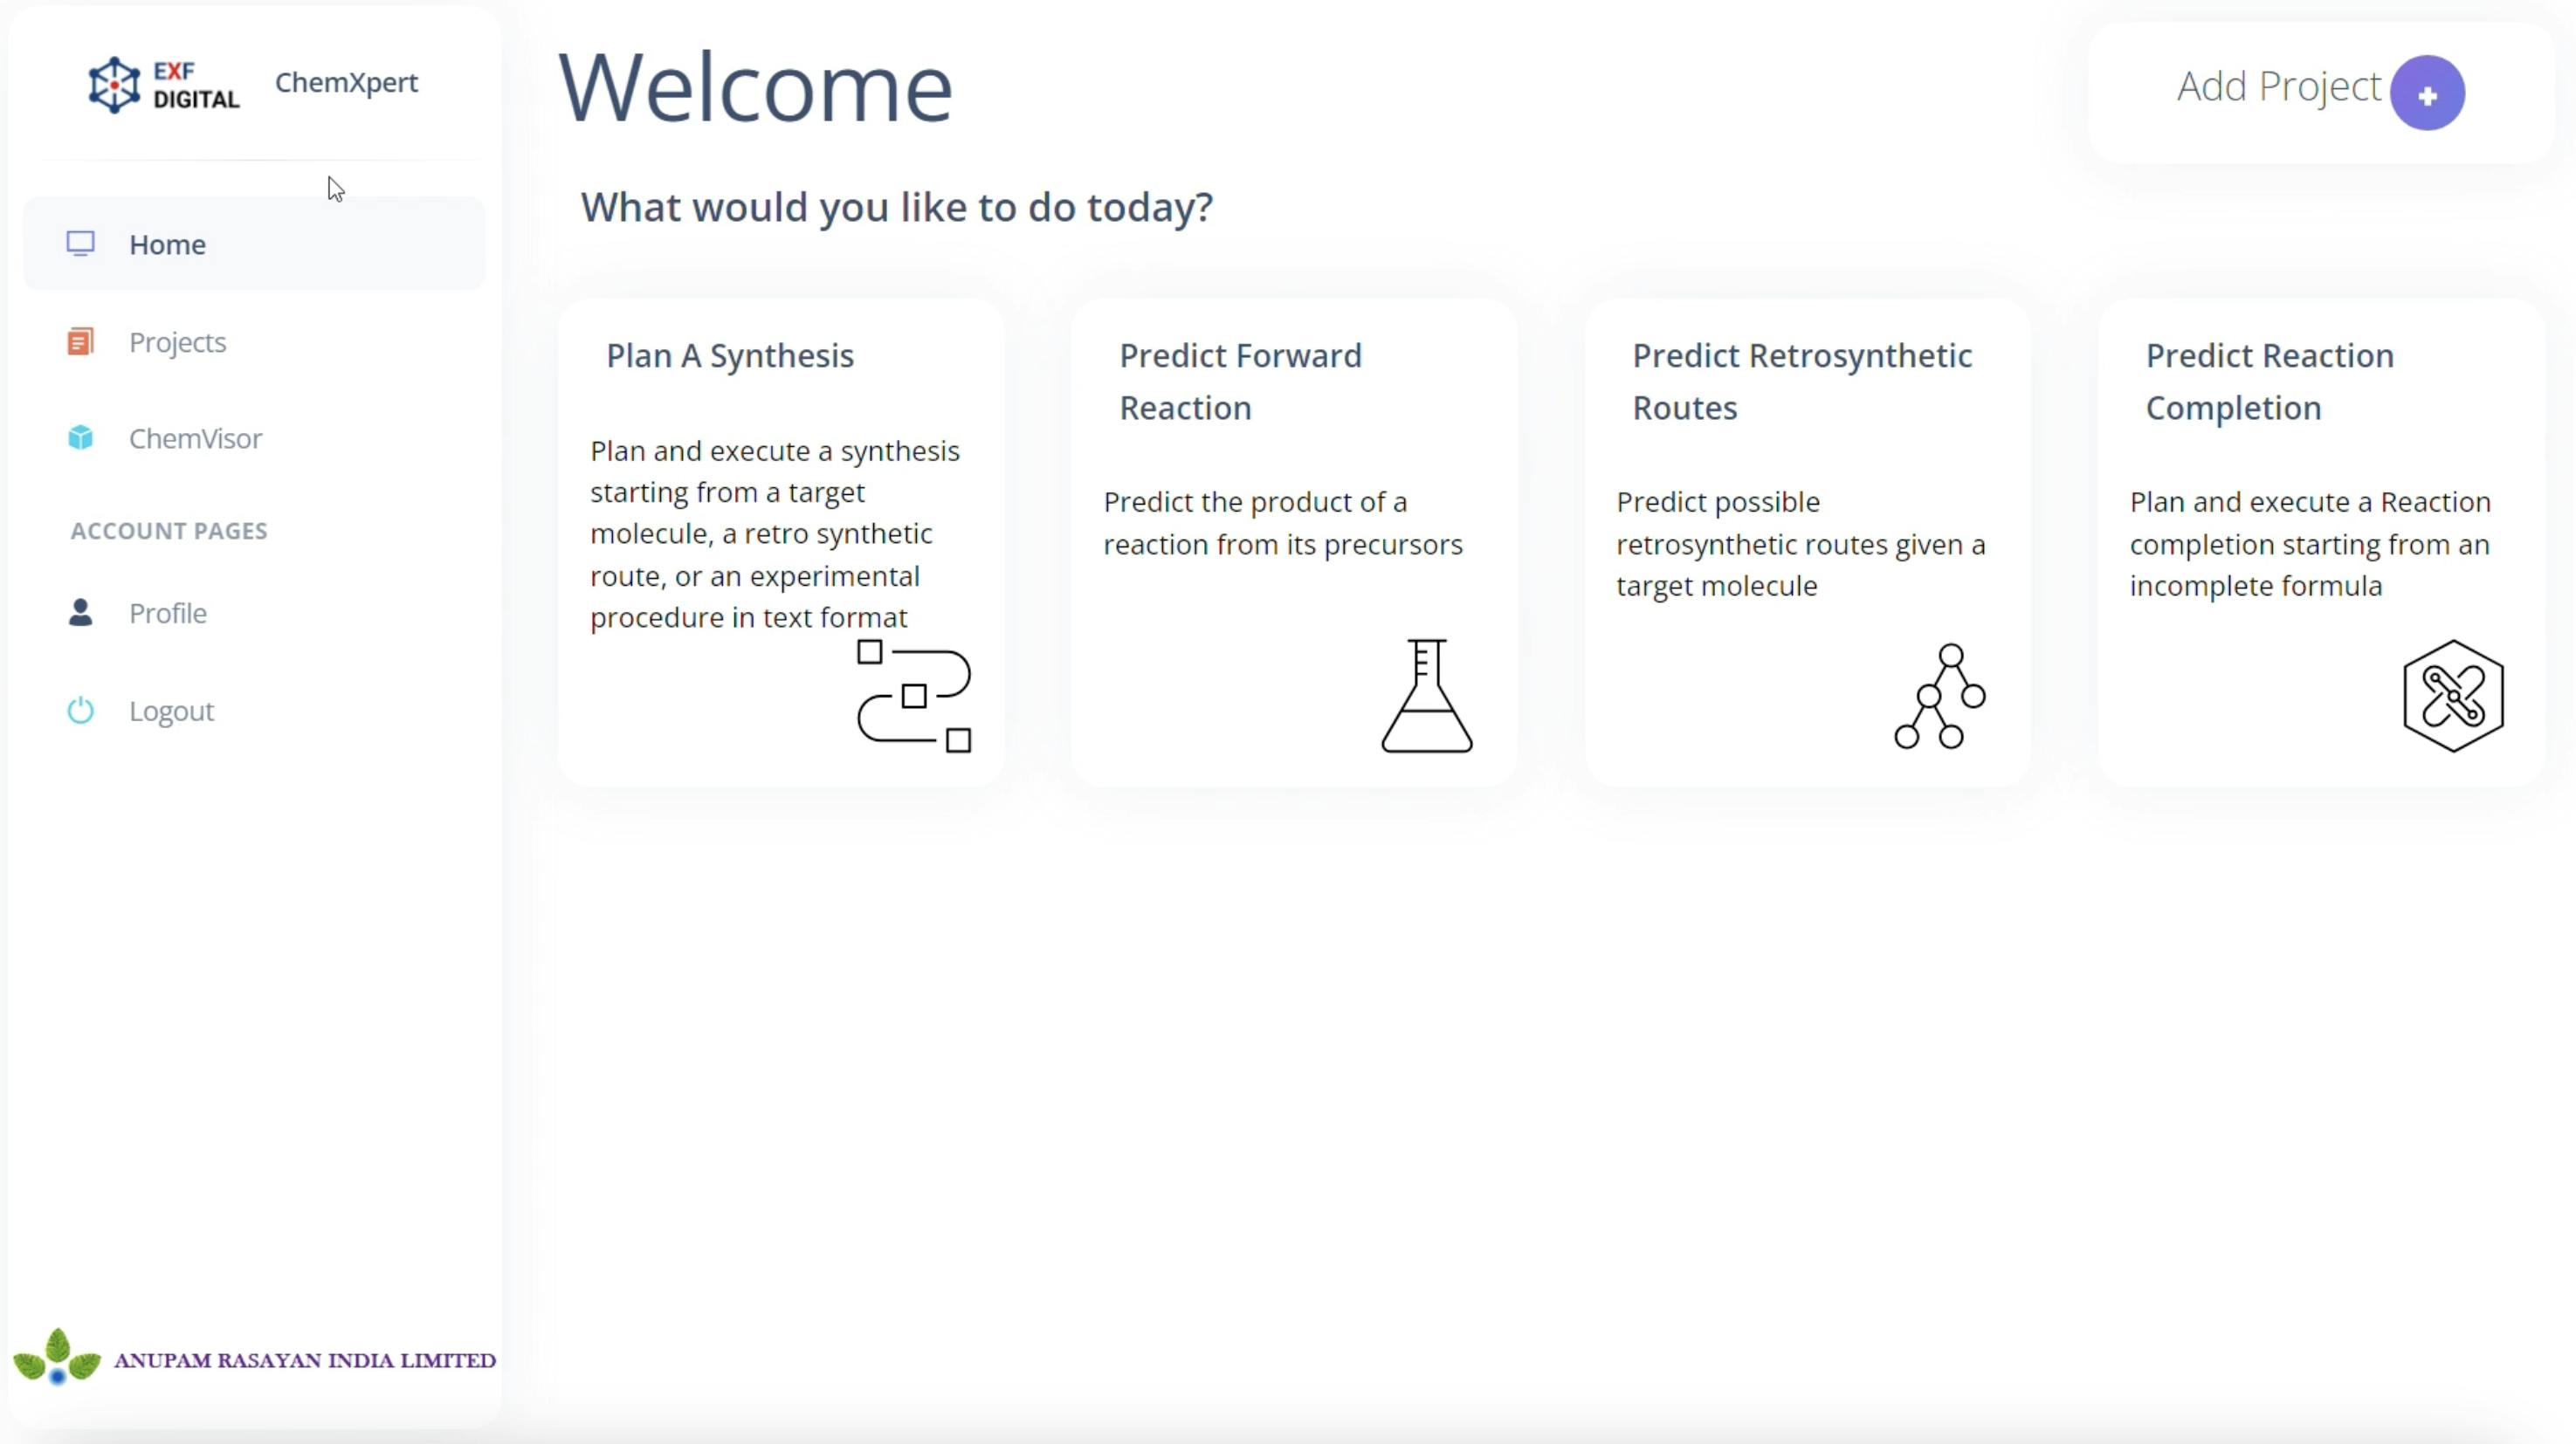 The home page for EXF ChemXpert, a one-stop platform that's accelerating the discovery of new molecules